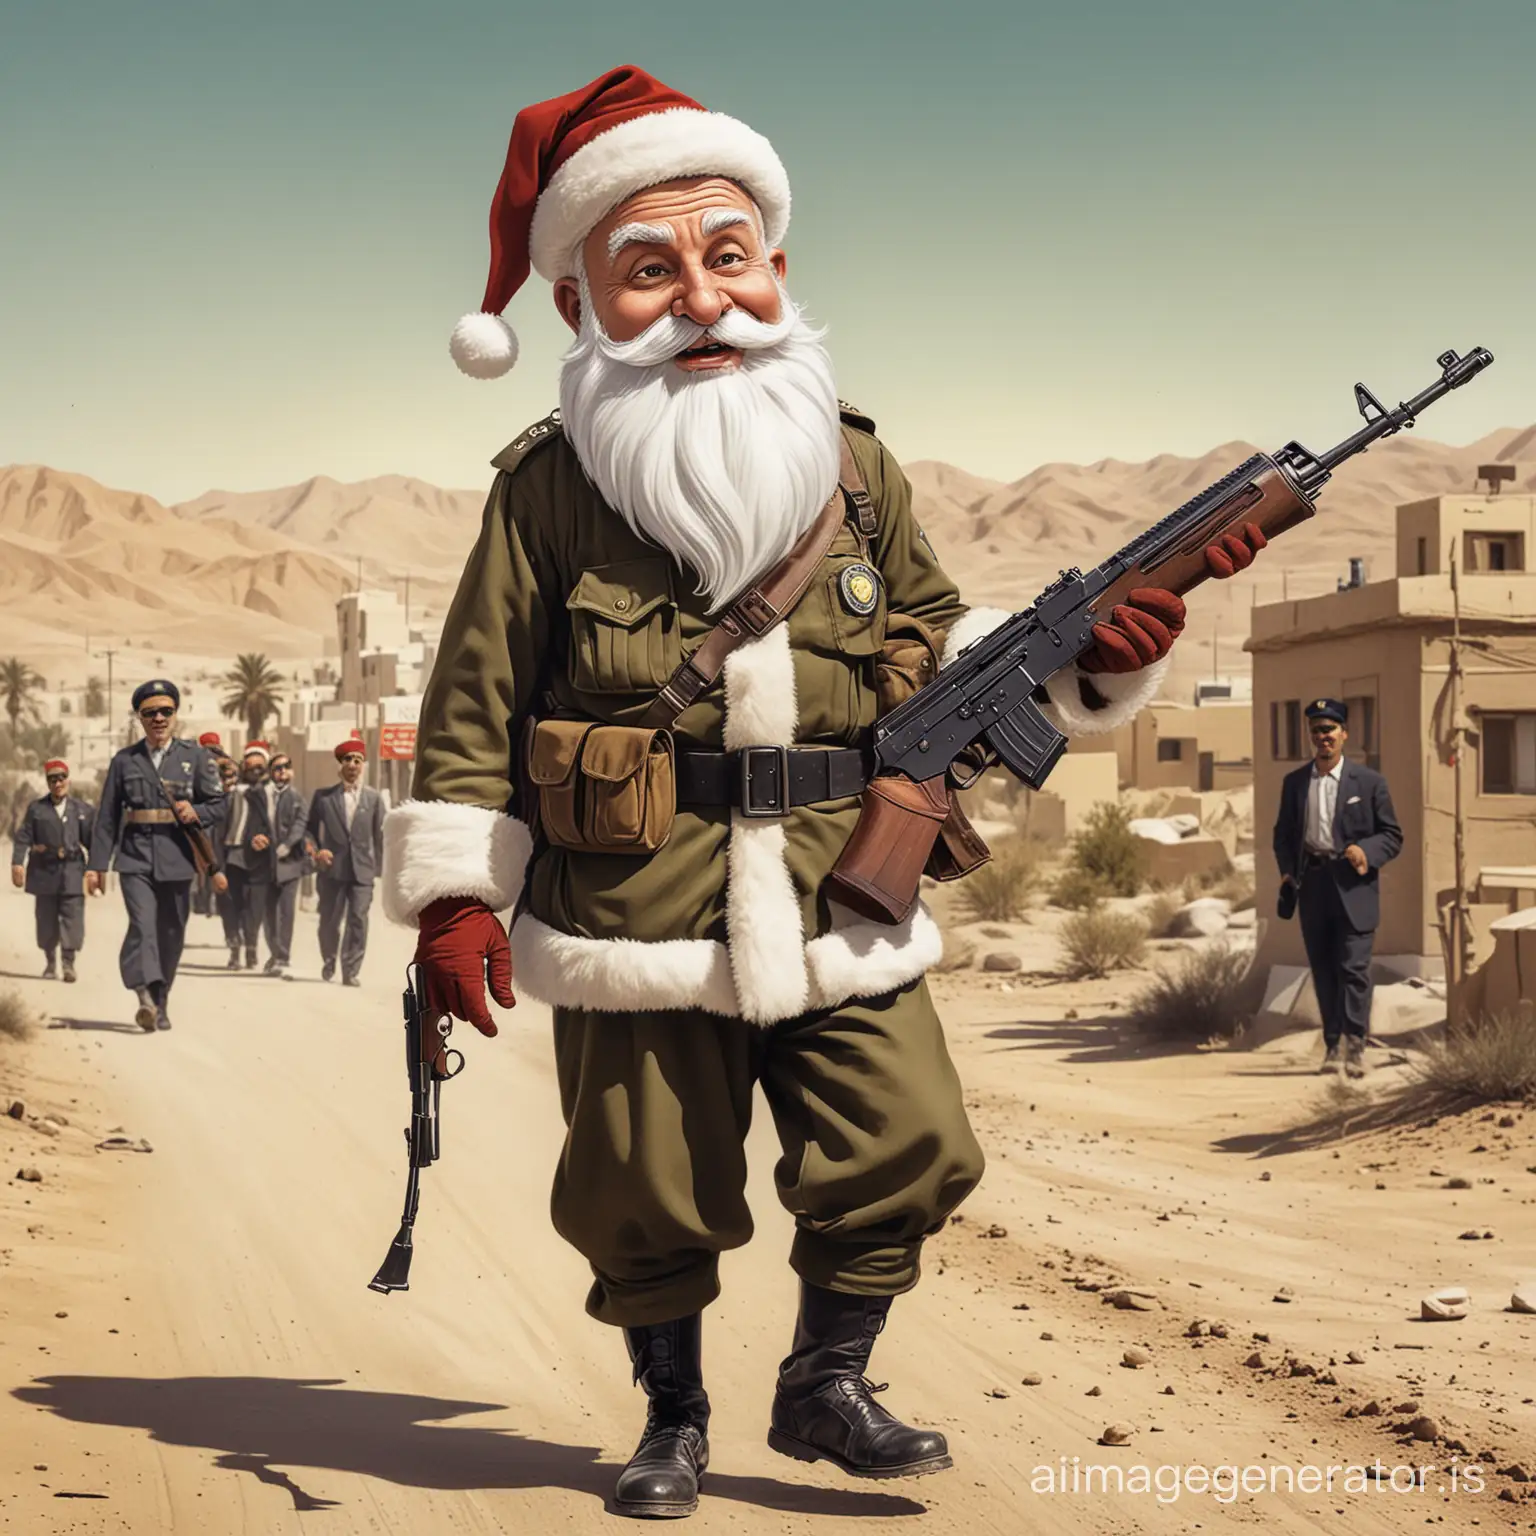 Photo in caricature style, funny, USA officer wearing a Santa Claus mask walking into Iran with an AK-47 in 1957.